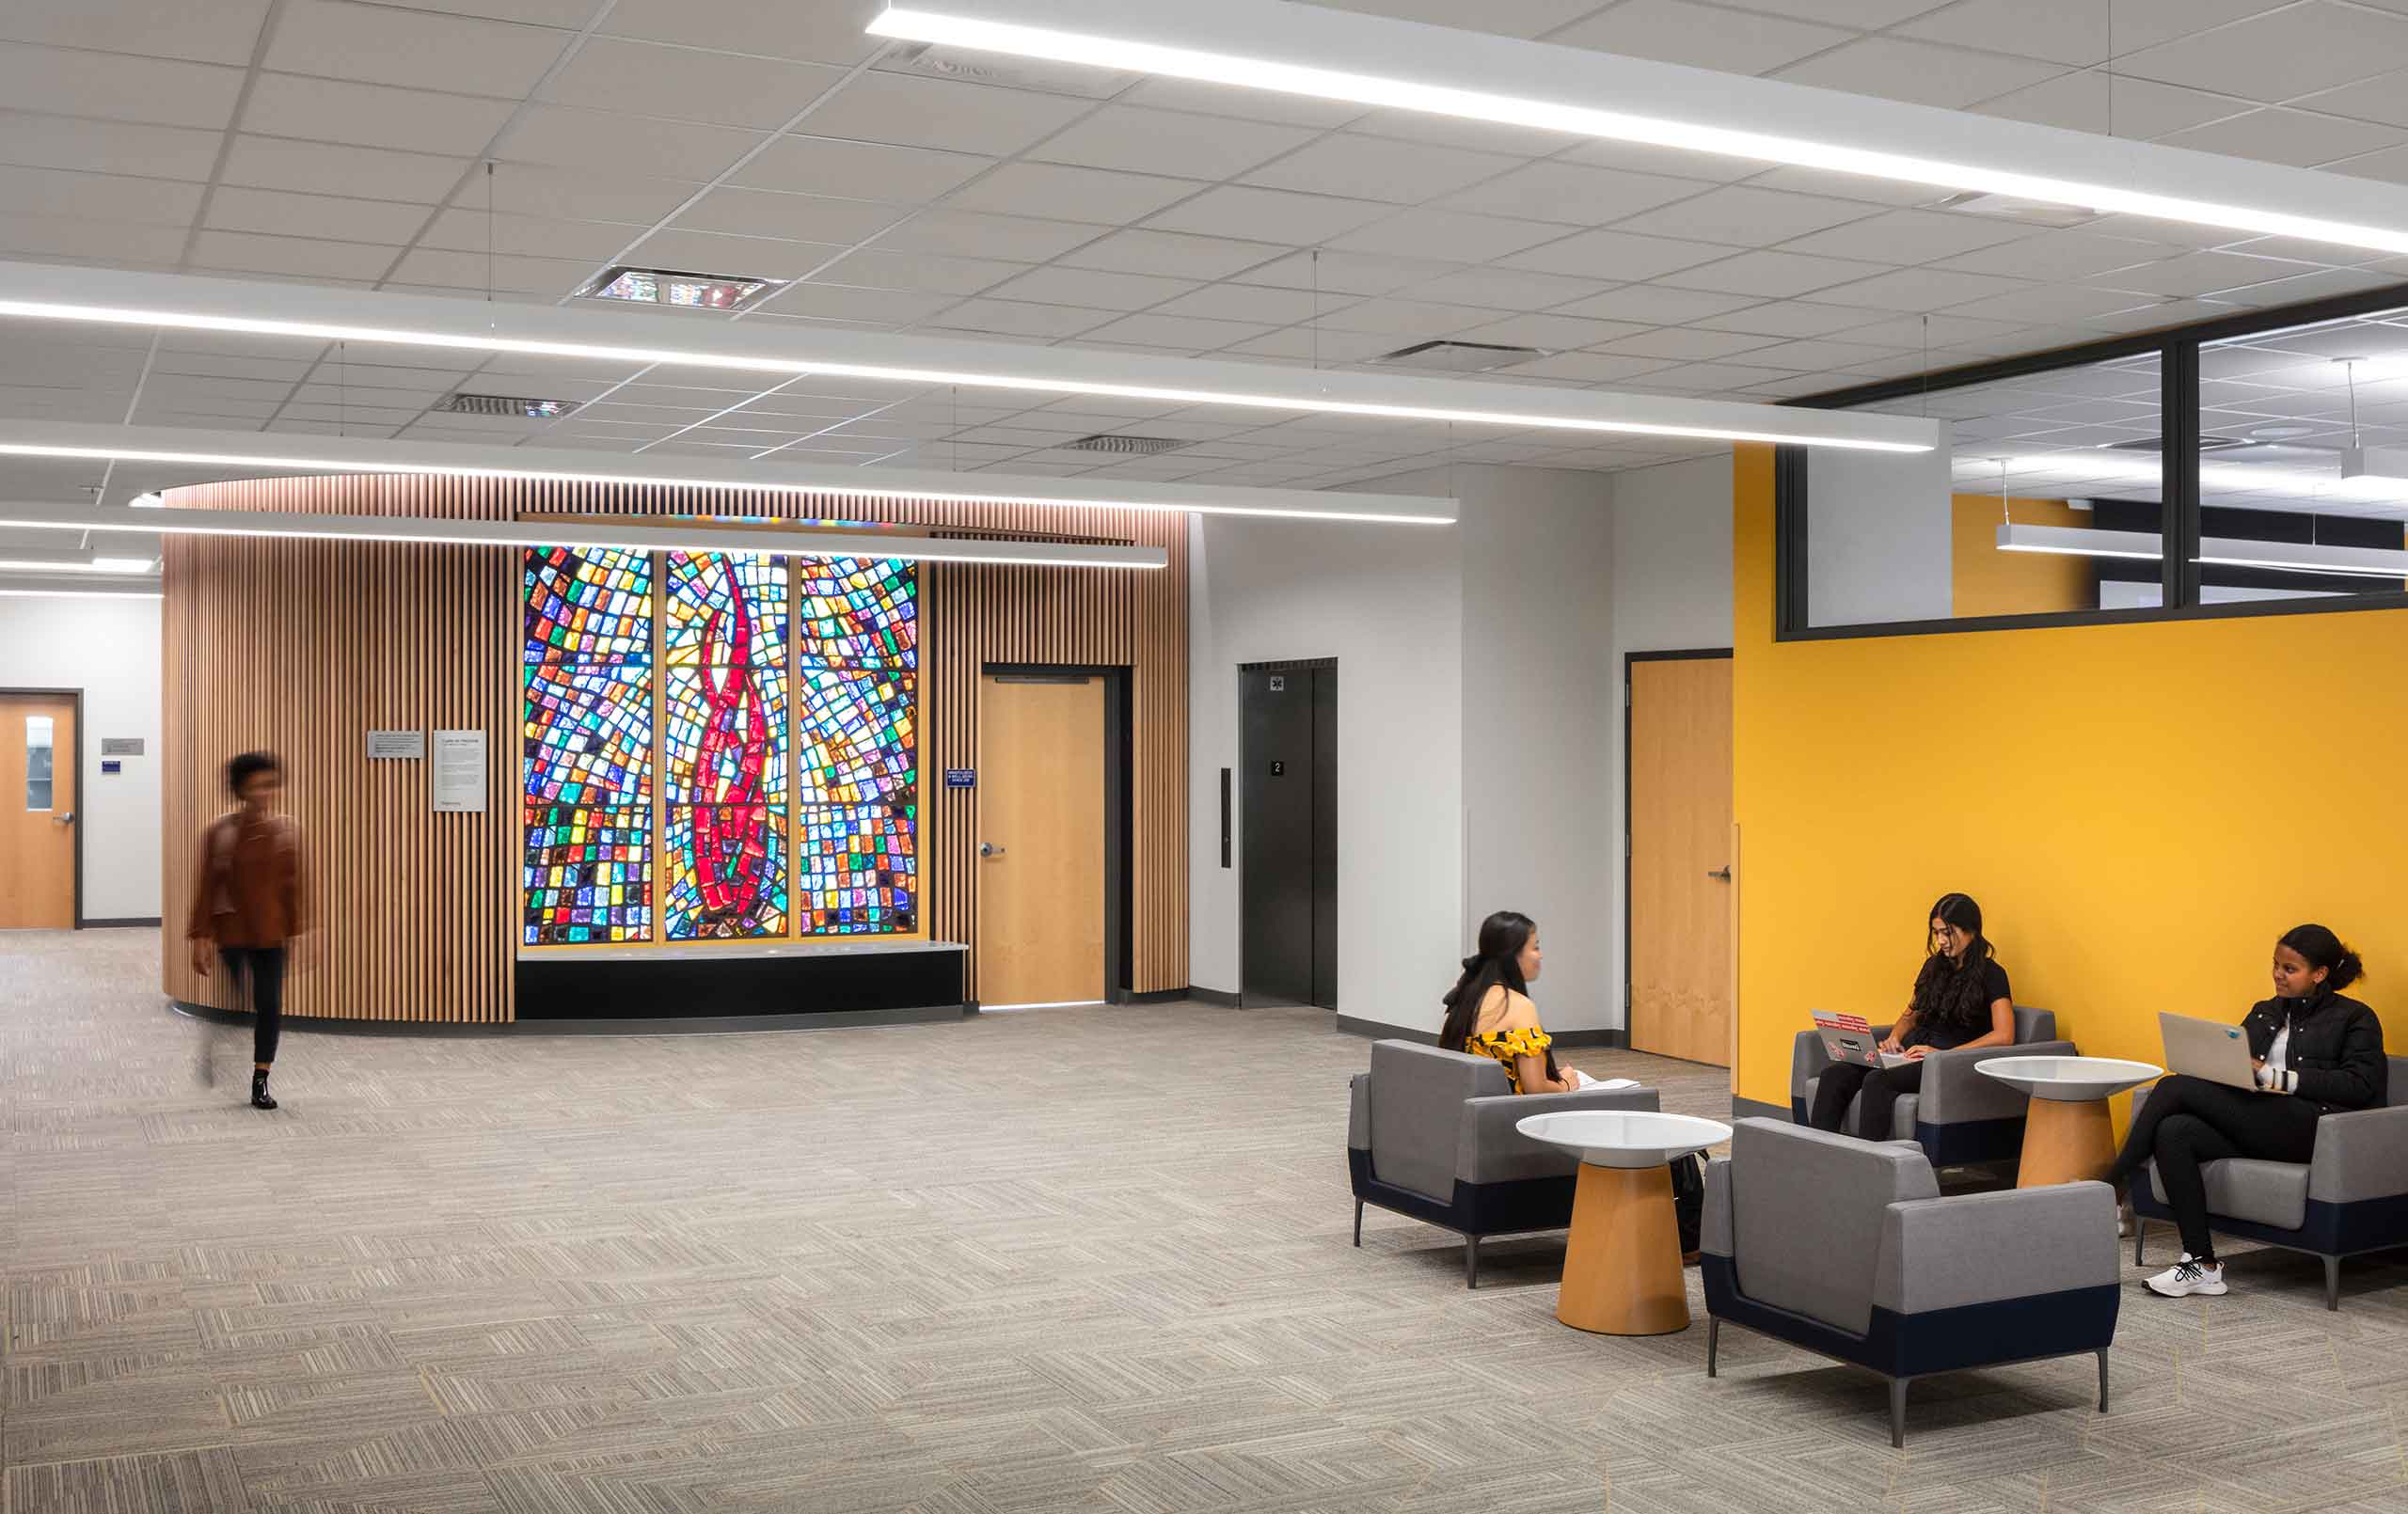 Students in second-floor corridor of Augustana College's Lindberg Center. Background shows stained glass window and meditation room.